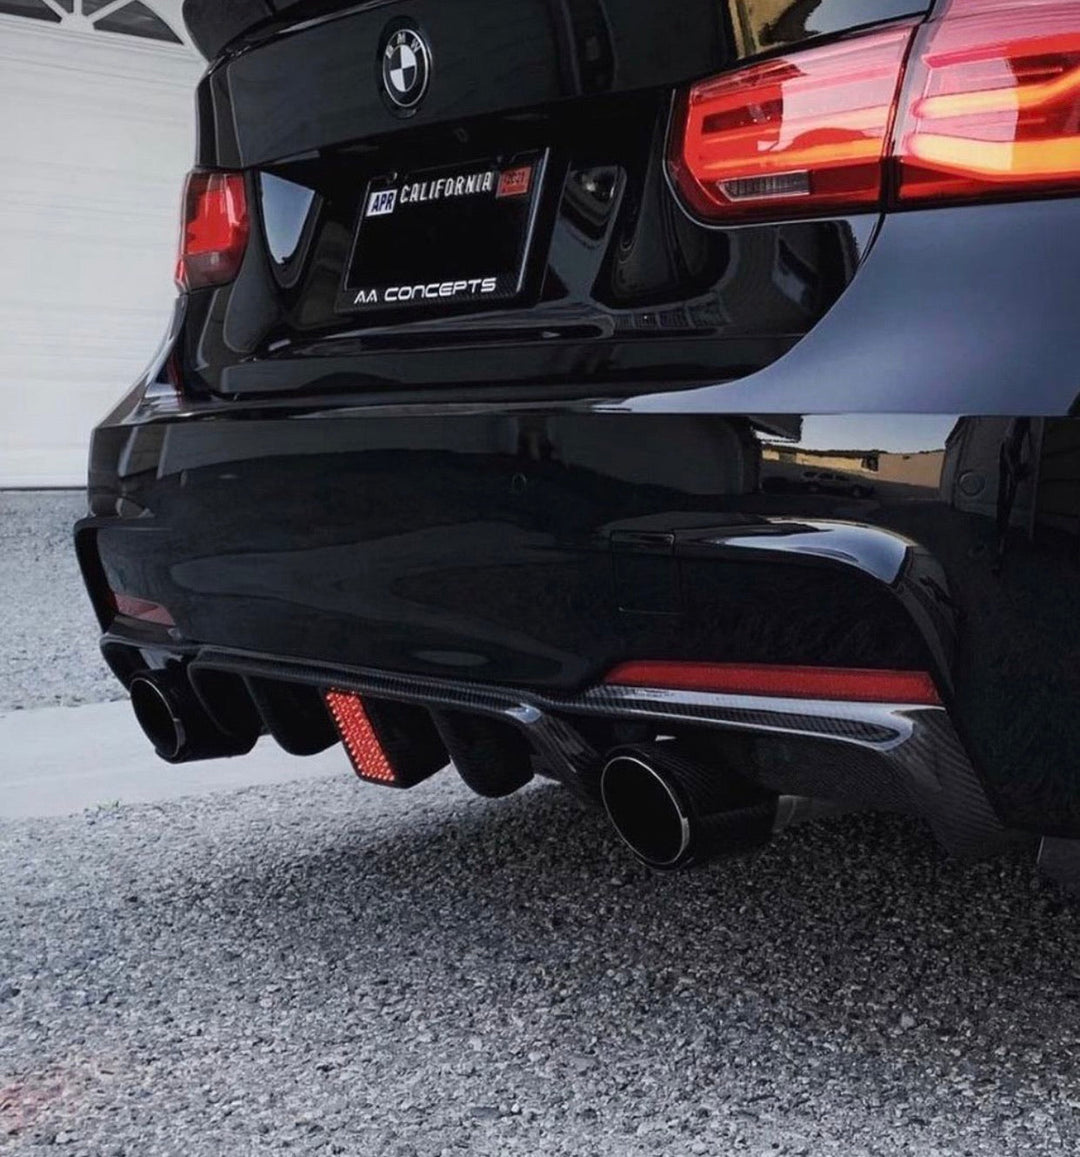 BMW F30 F31 3 Series Carbon Fibre Rear Diffuser with LED Light